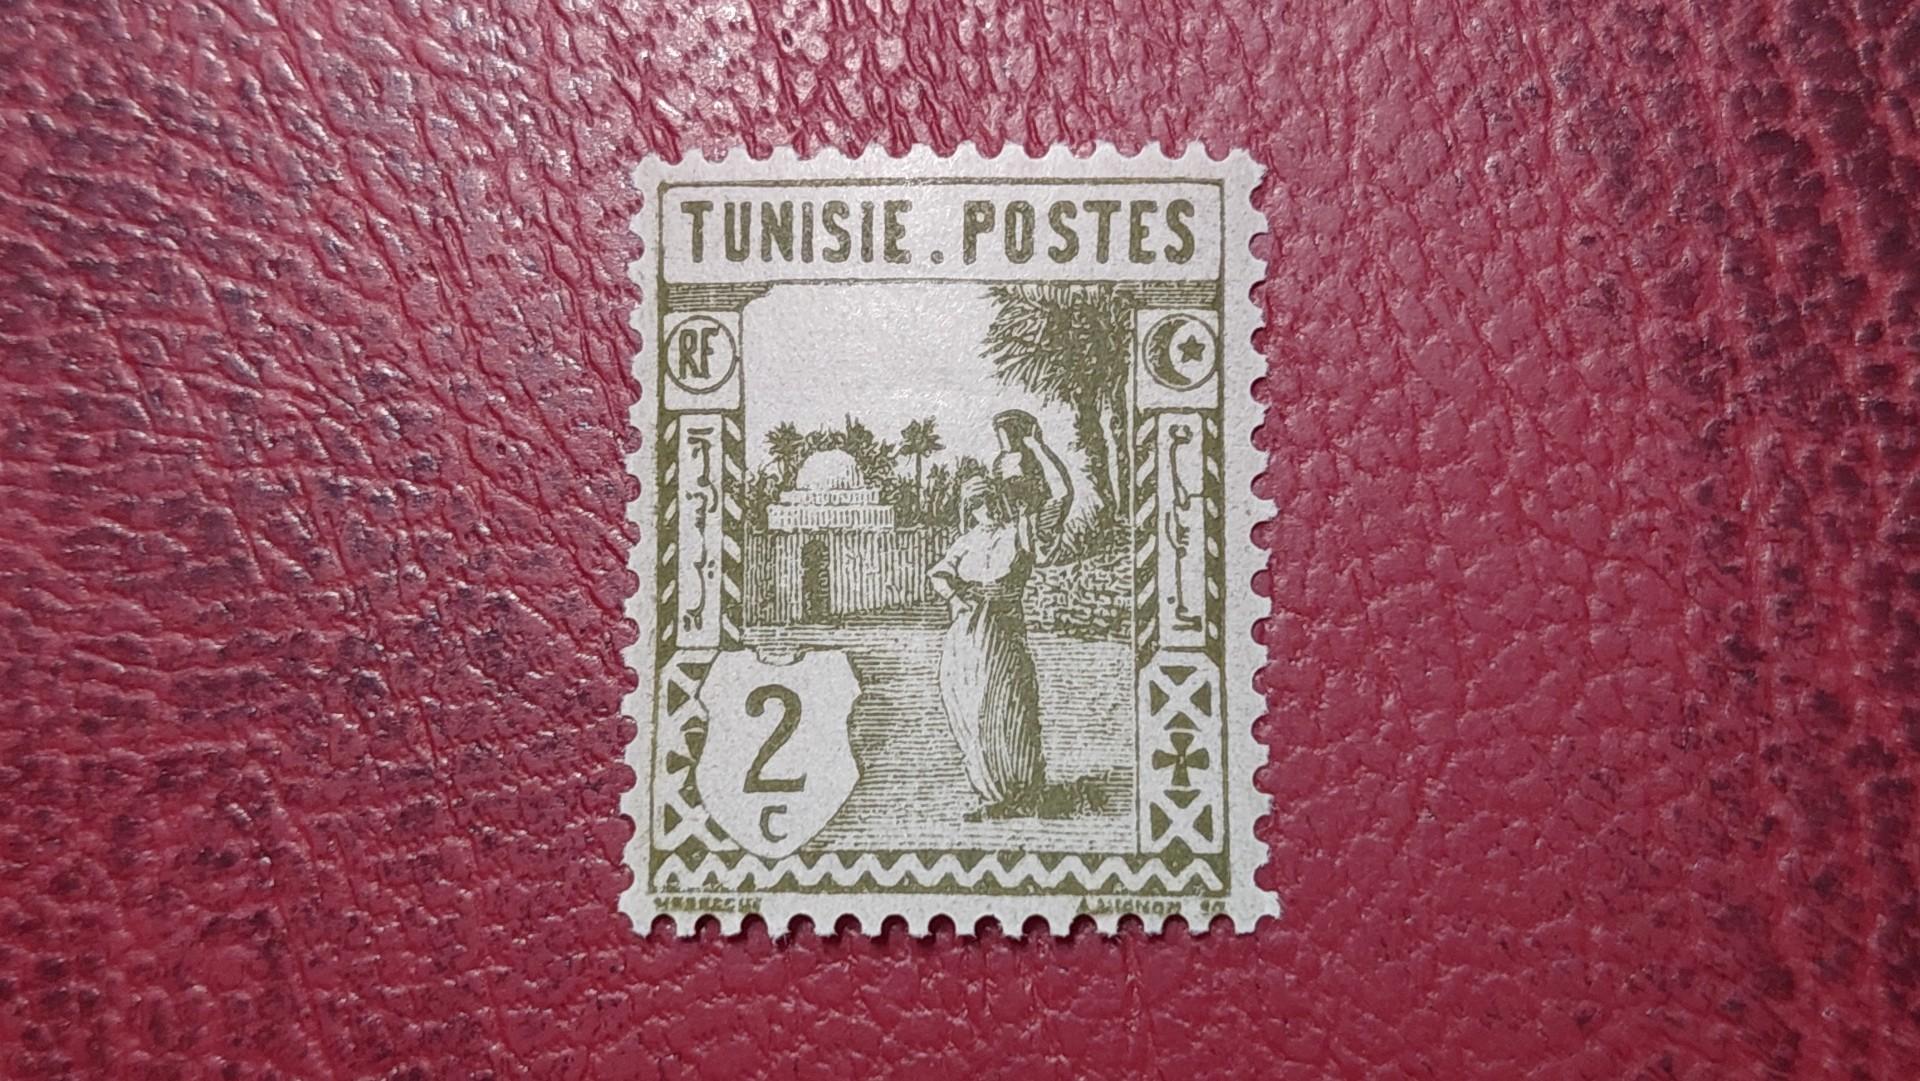 2C 1926 Tunisas 129 Land and People